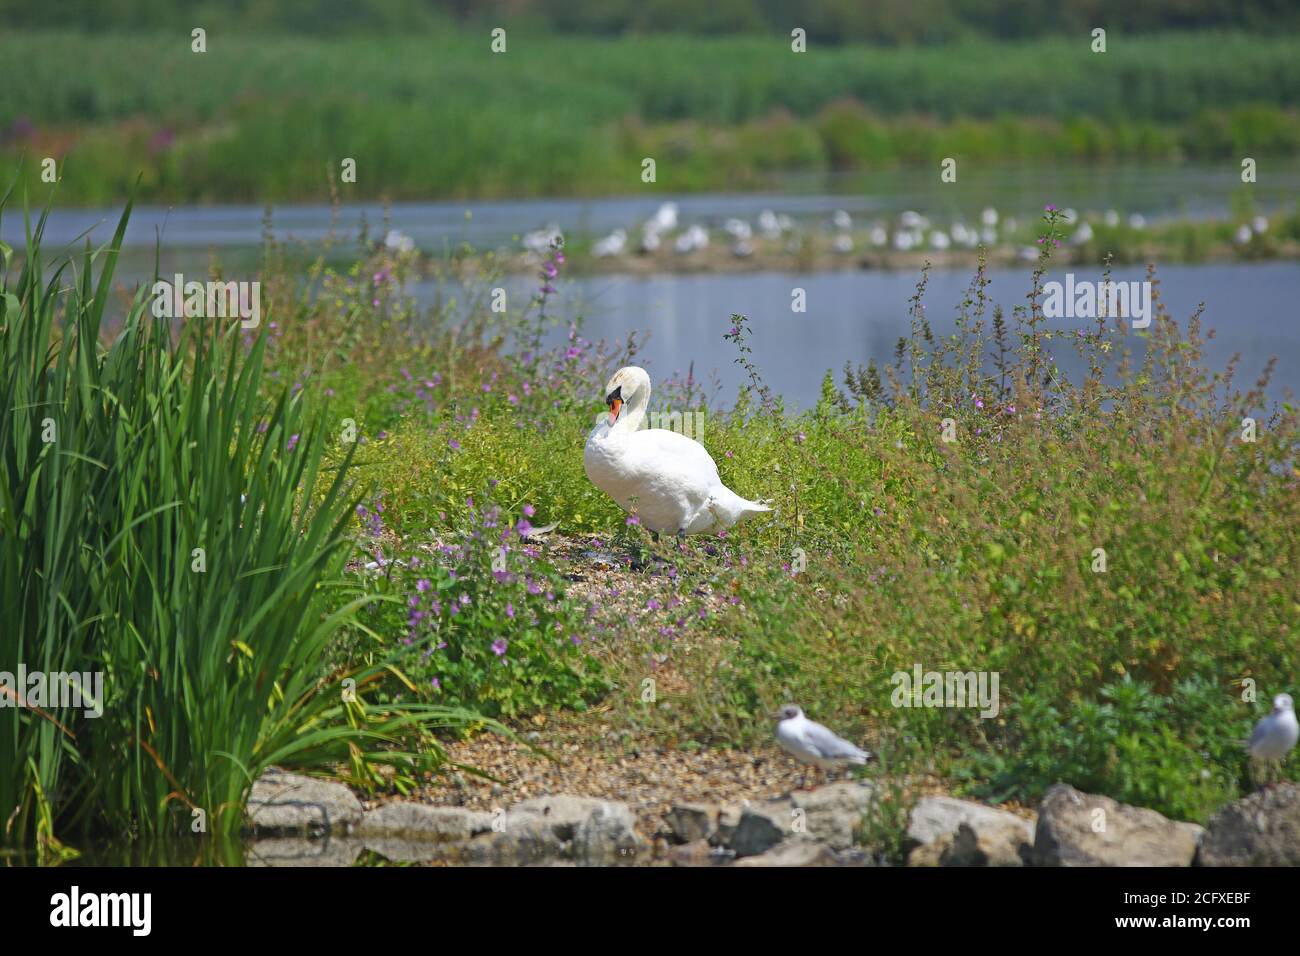 Mute Swan standing on a small island in the middle of a lake with lake and other birds in the background Stock Photo